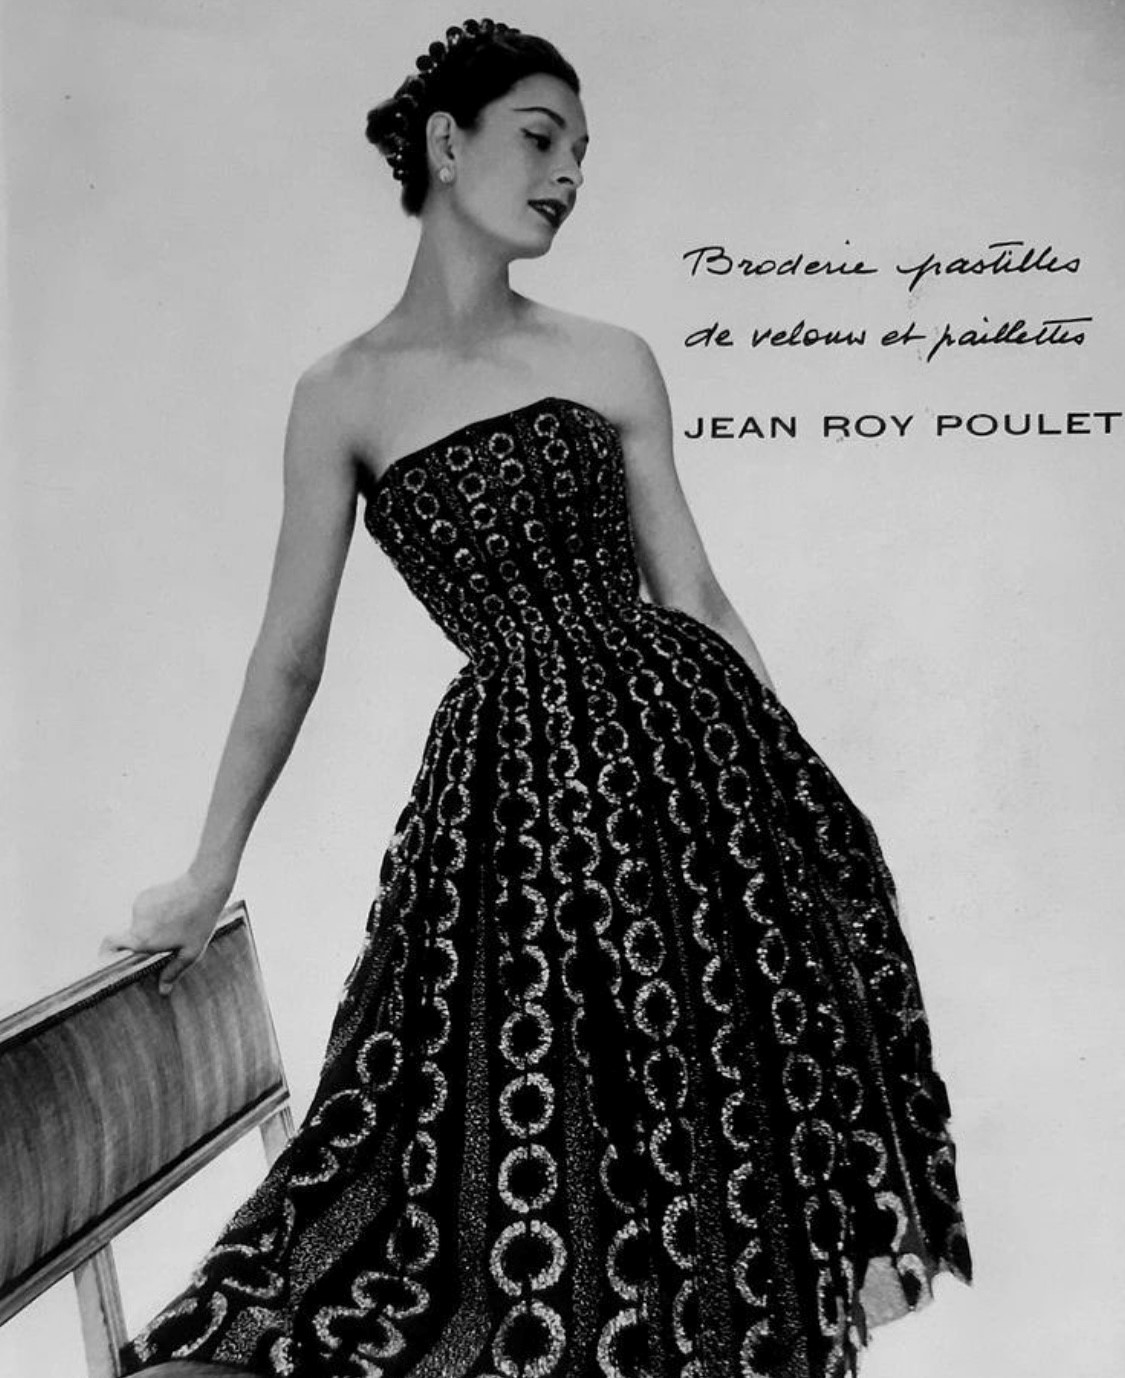 Dior evening dress with lots of petticoats, 1950s